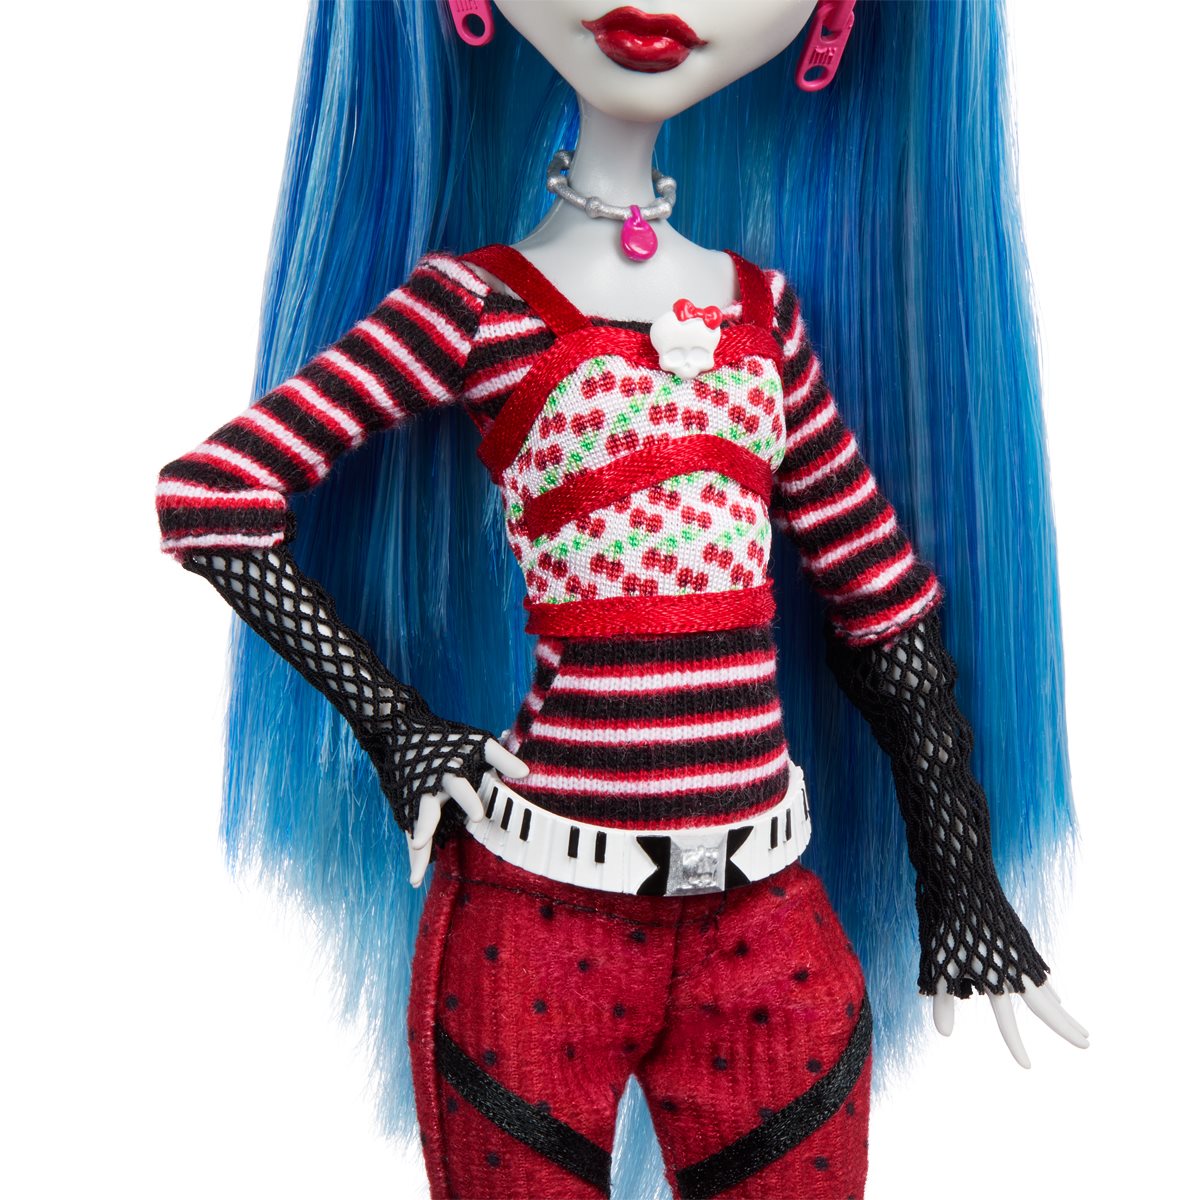 Booriginal Creeproduction Ghoulia Collectible Doll (Pre-Order)